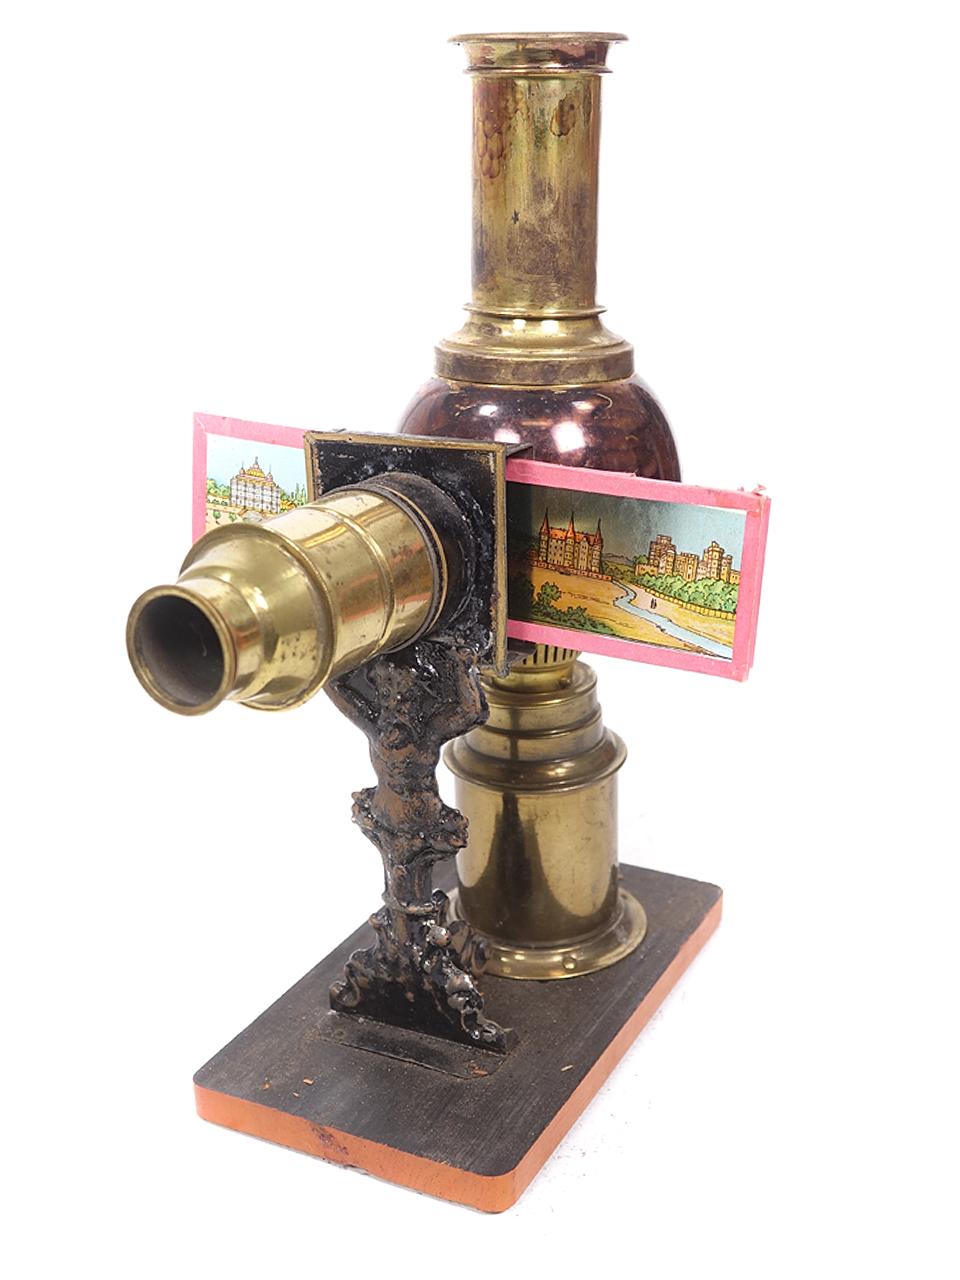 This is a beautiful and decorative 1800 magic lantern full boxed set. We believe it was created by Ernst Plank. The body has unusual sphere brass kerosene lamp housing and a figural character holding the lens. It's complete and even comes with a